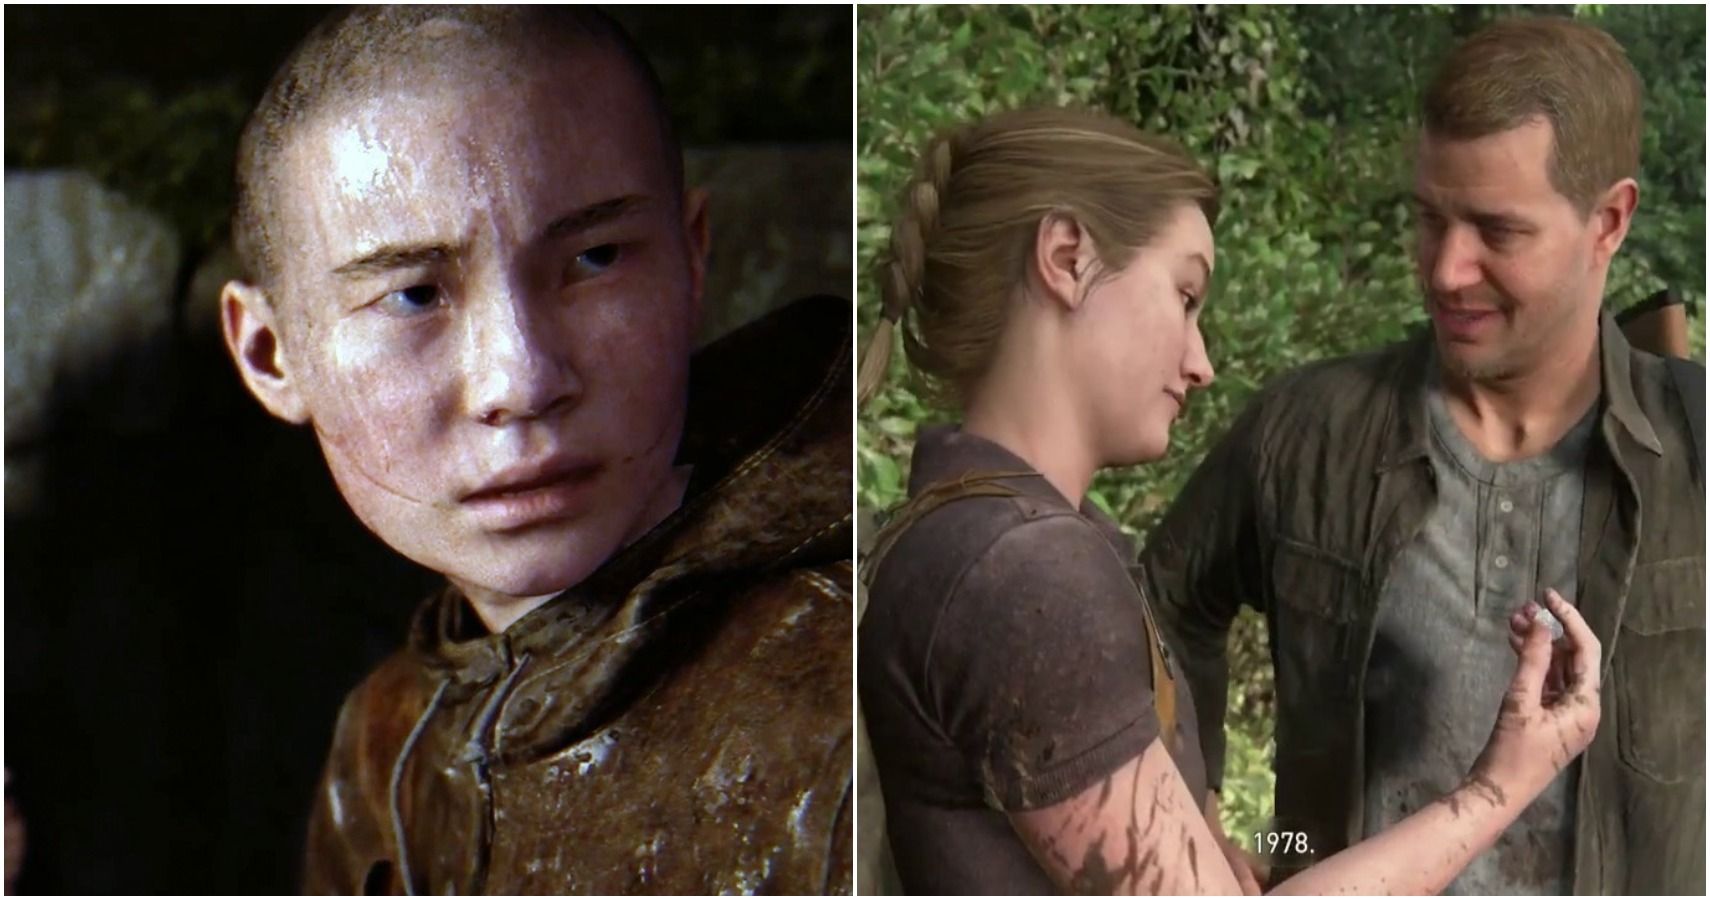 Transsexual, The Last of Us 2, Abby, Owen, video games